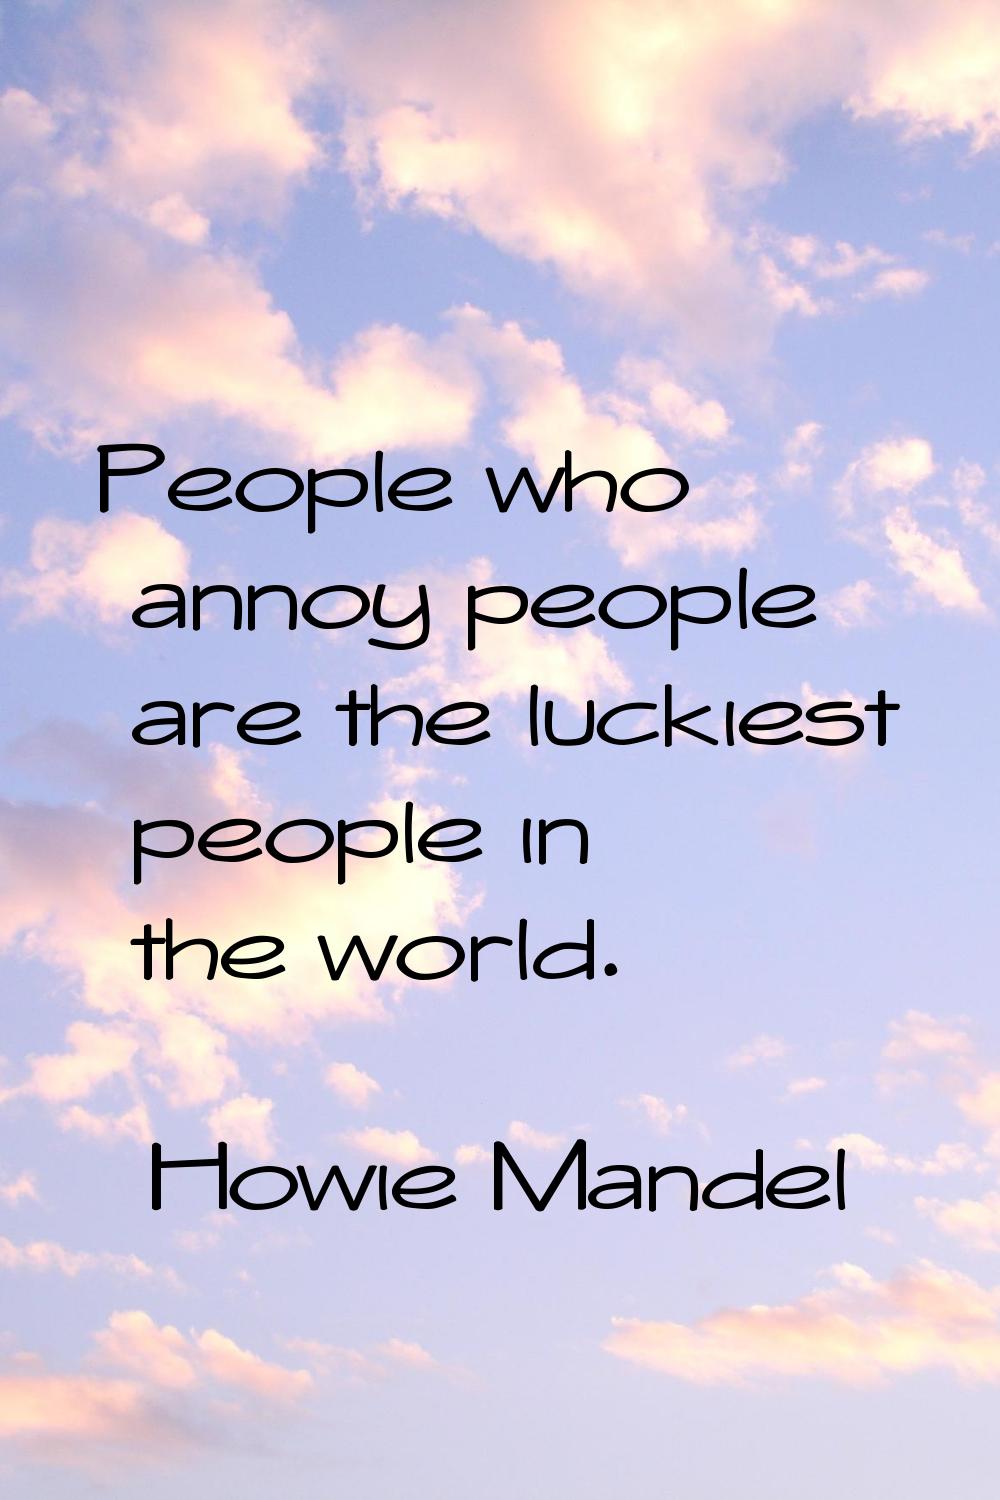 People who annoy people are the luckiest people in the world.